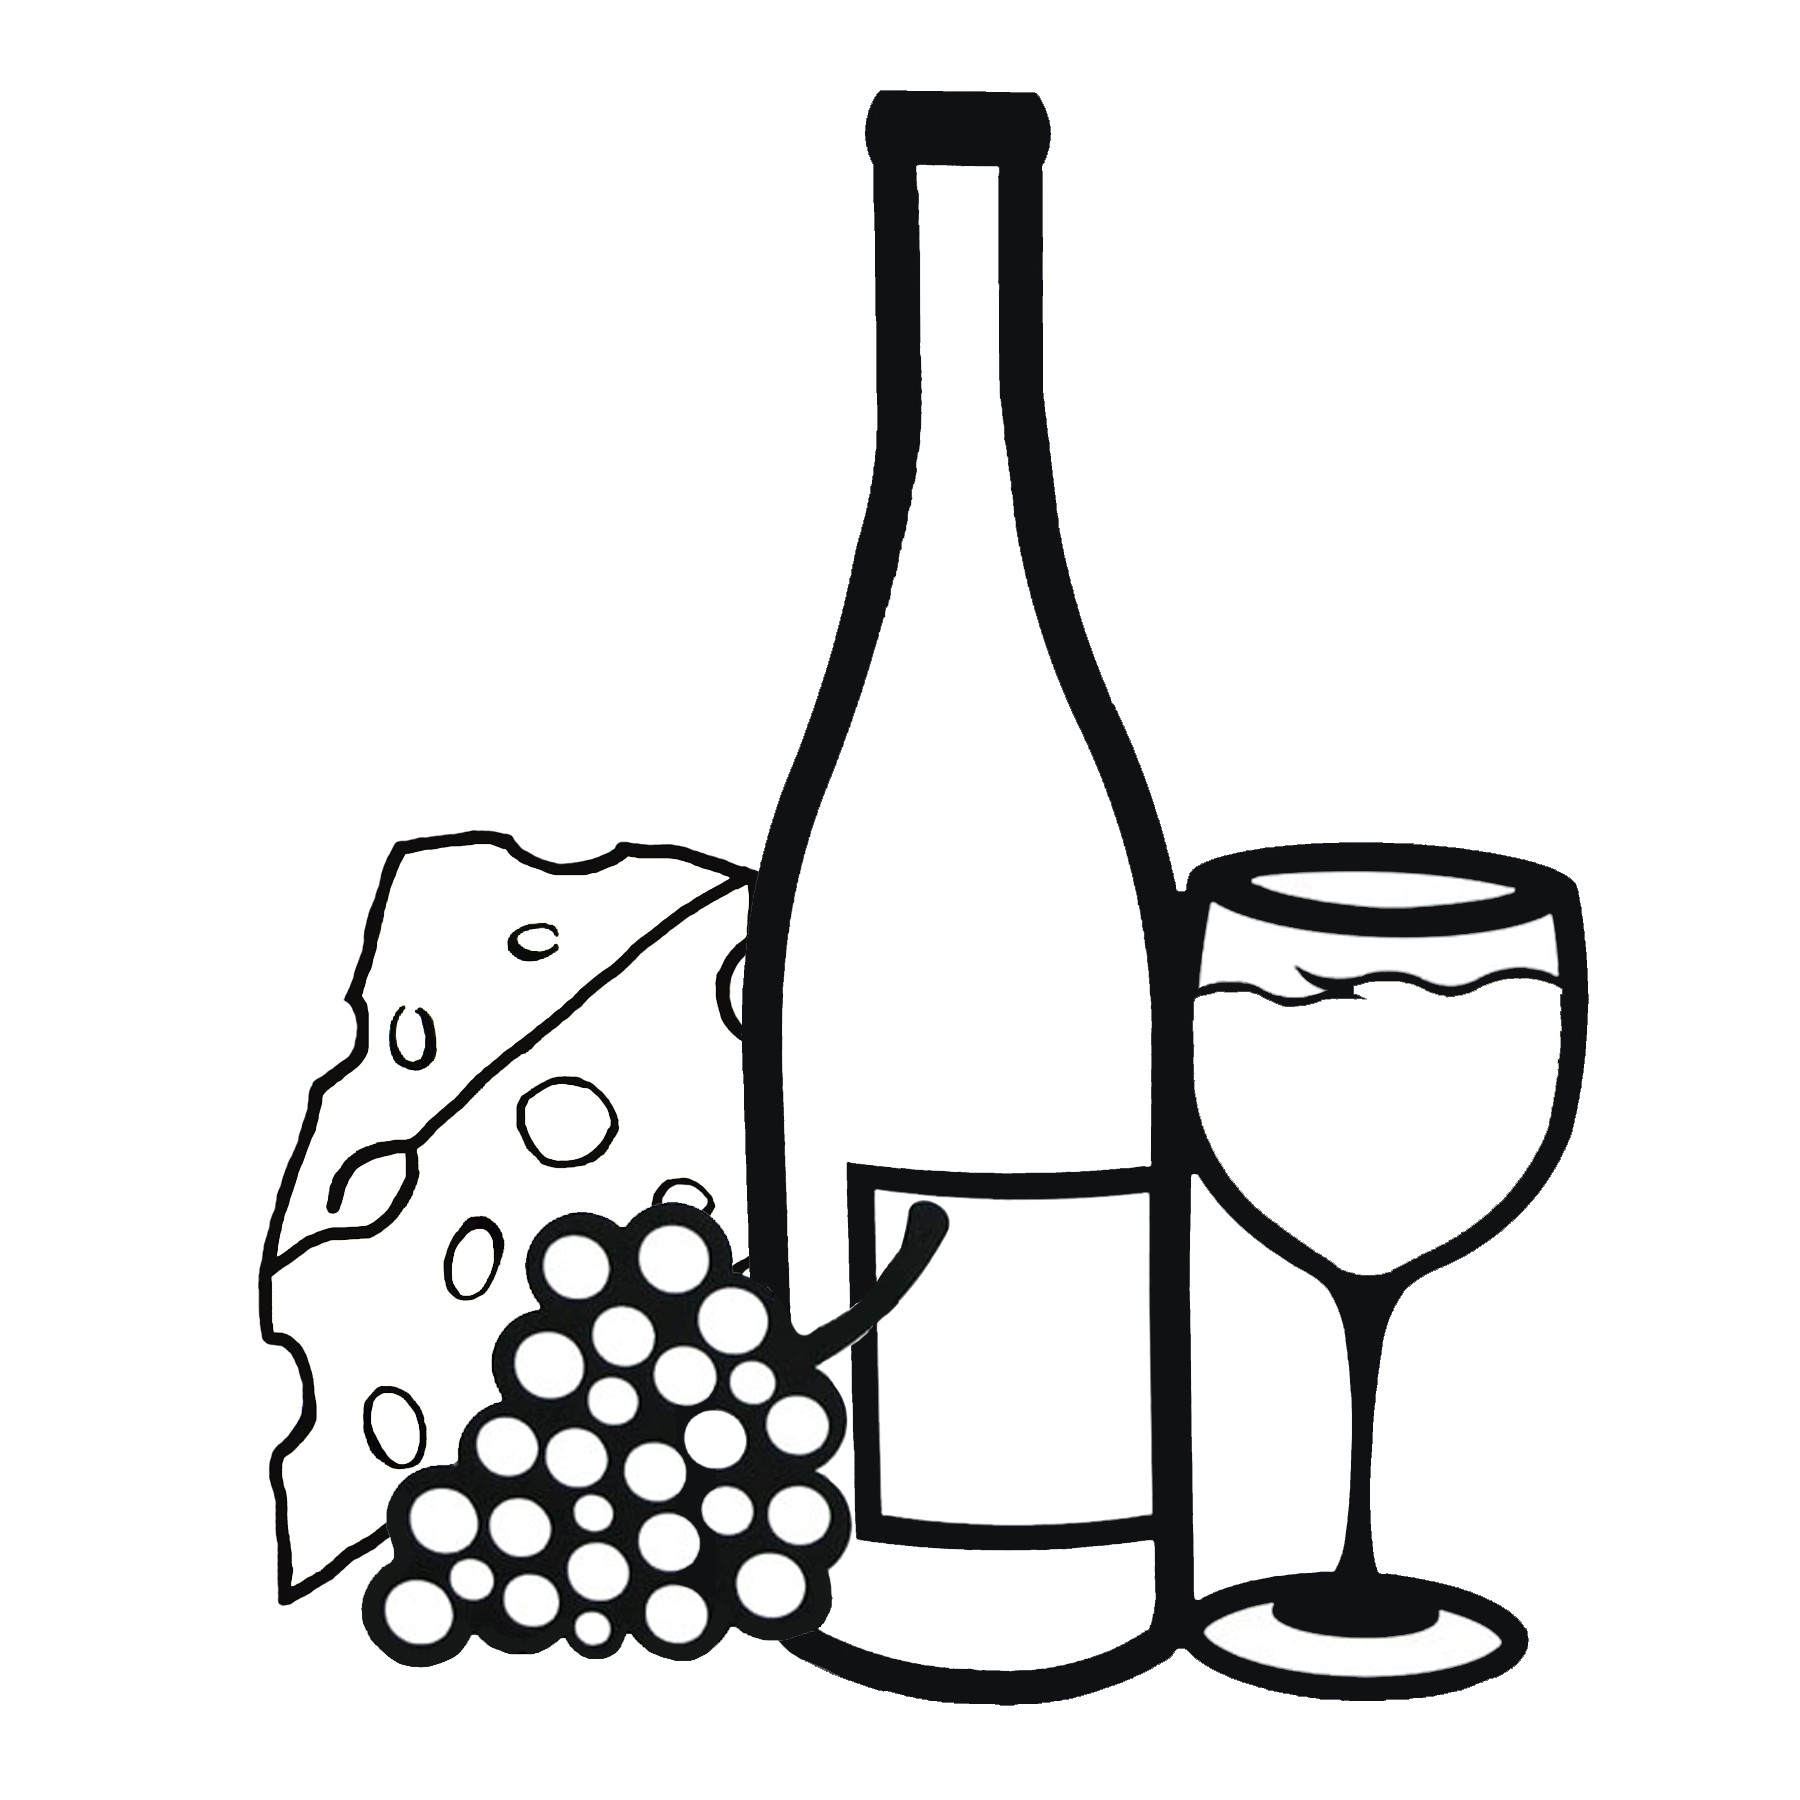 clipart party wine glass - photo #46